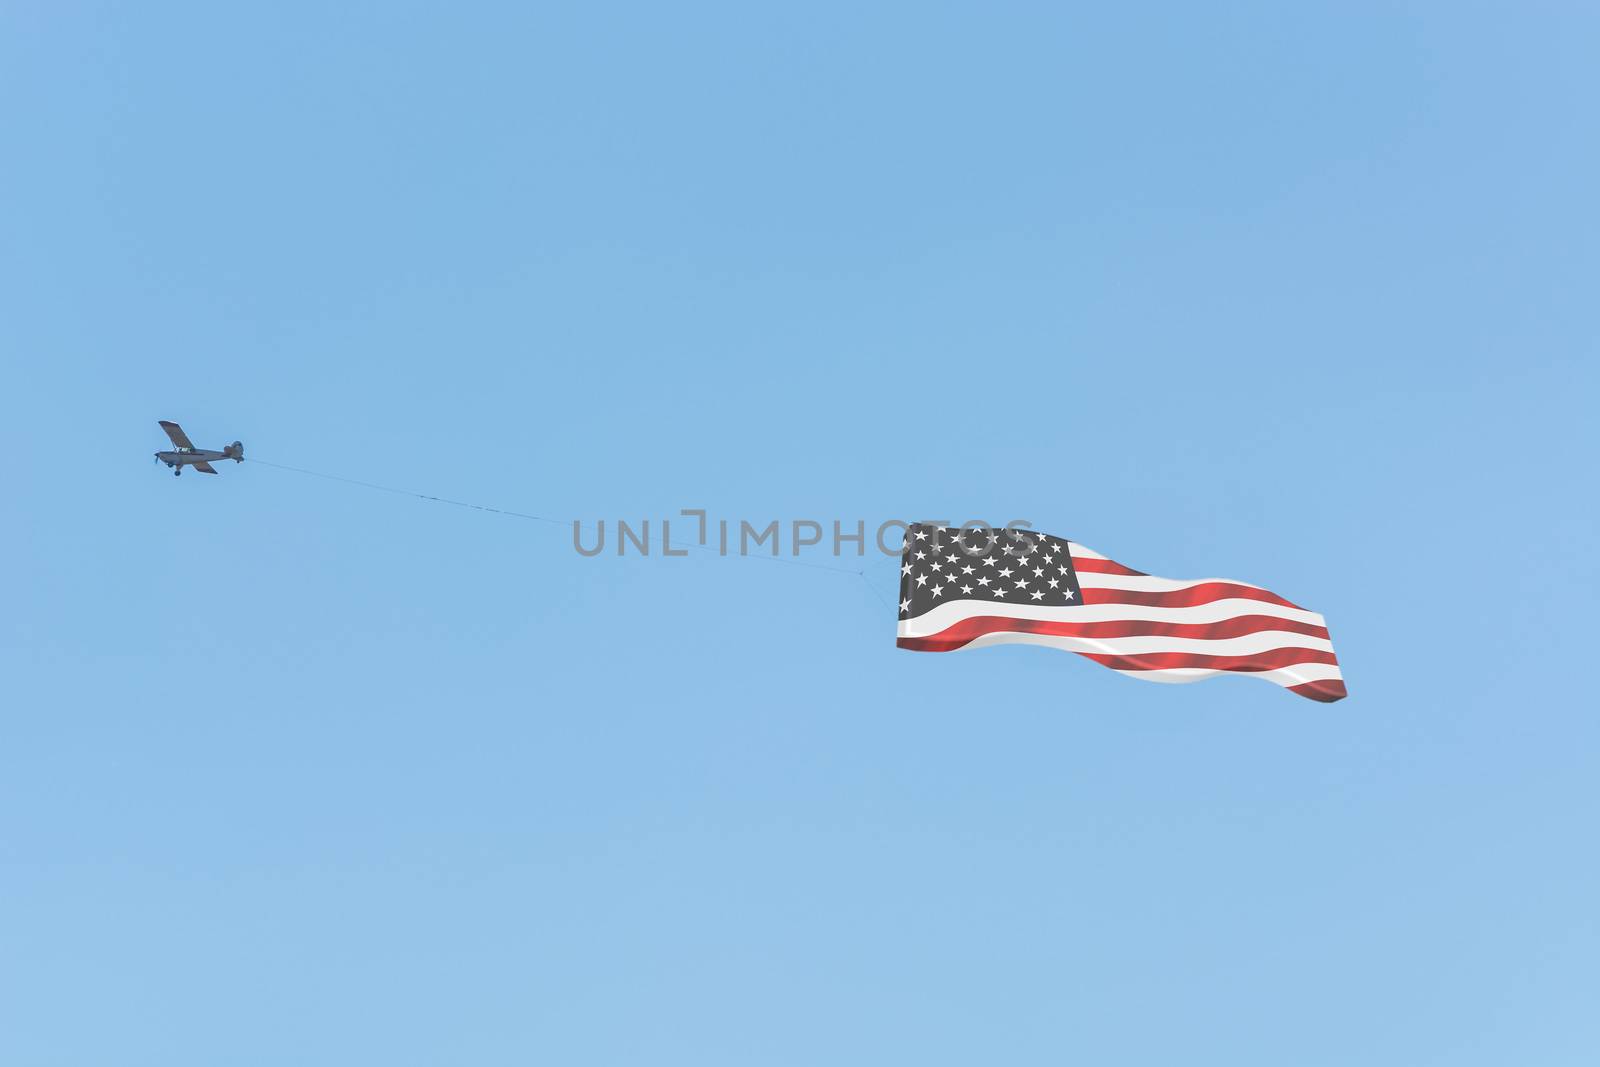 Banner towing, small engine aircraft towing banners for advertising.
Here the flag of America.
